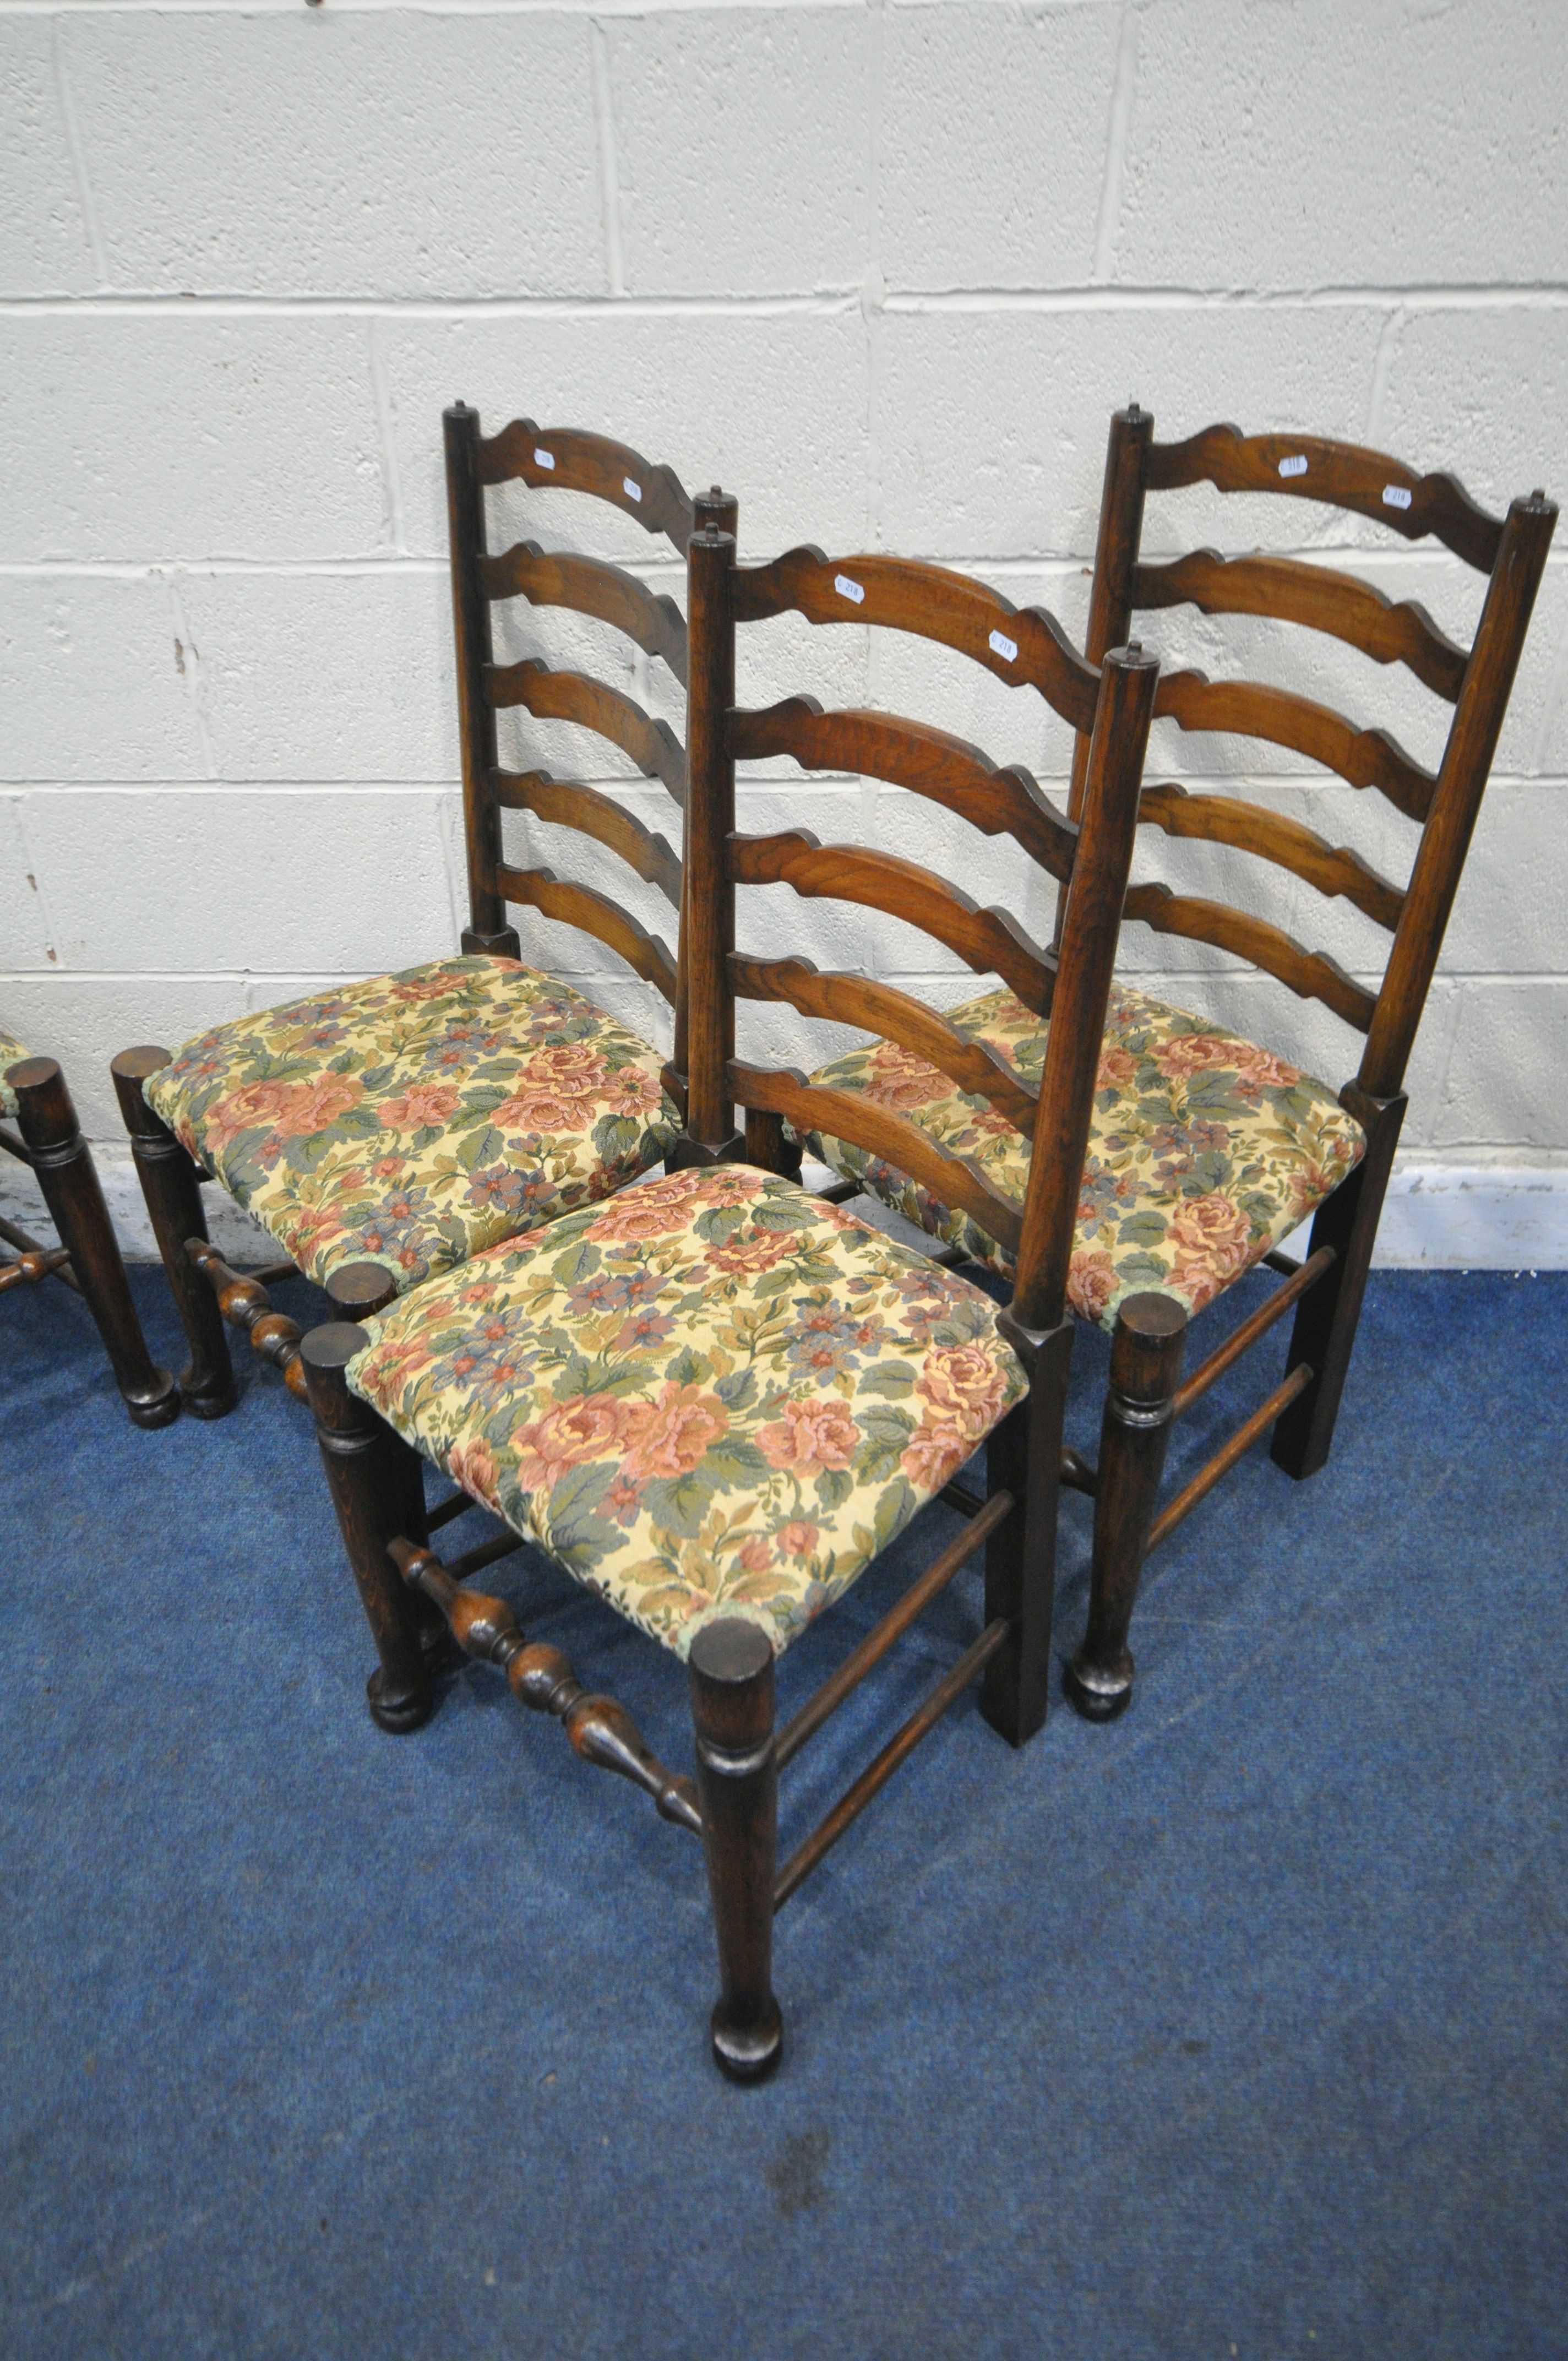 A SET OF SIX OAK LADDER BACK CHAIRS, with beige and floral upholstery, on turned legs and stretchers - Image 2 of 4